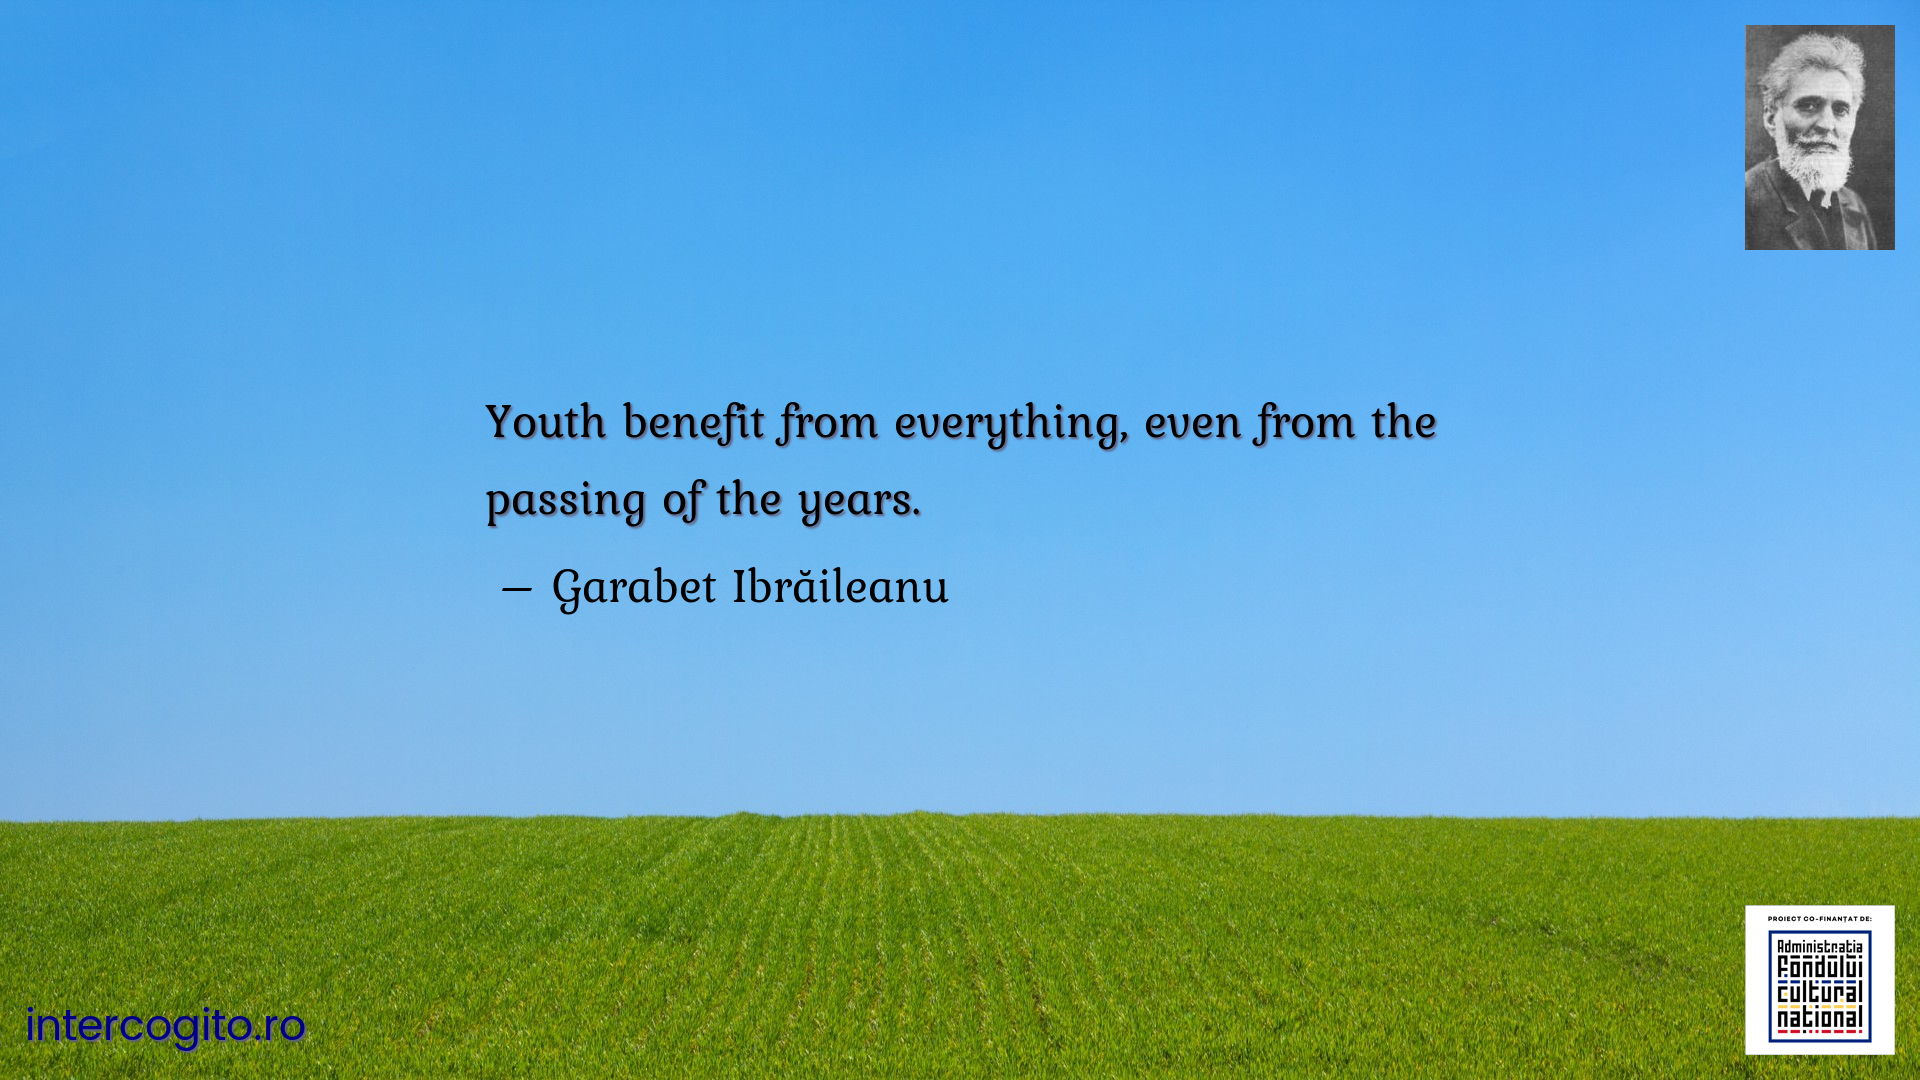 Youth benefit from everything, even from the passing of the years.